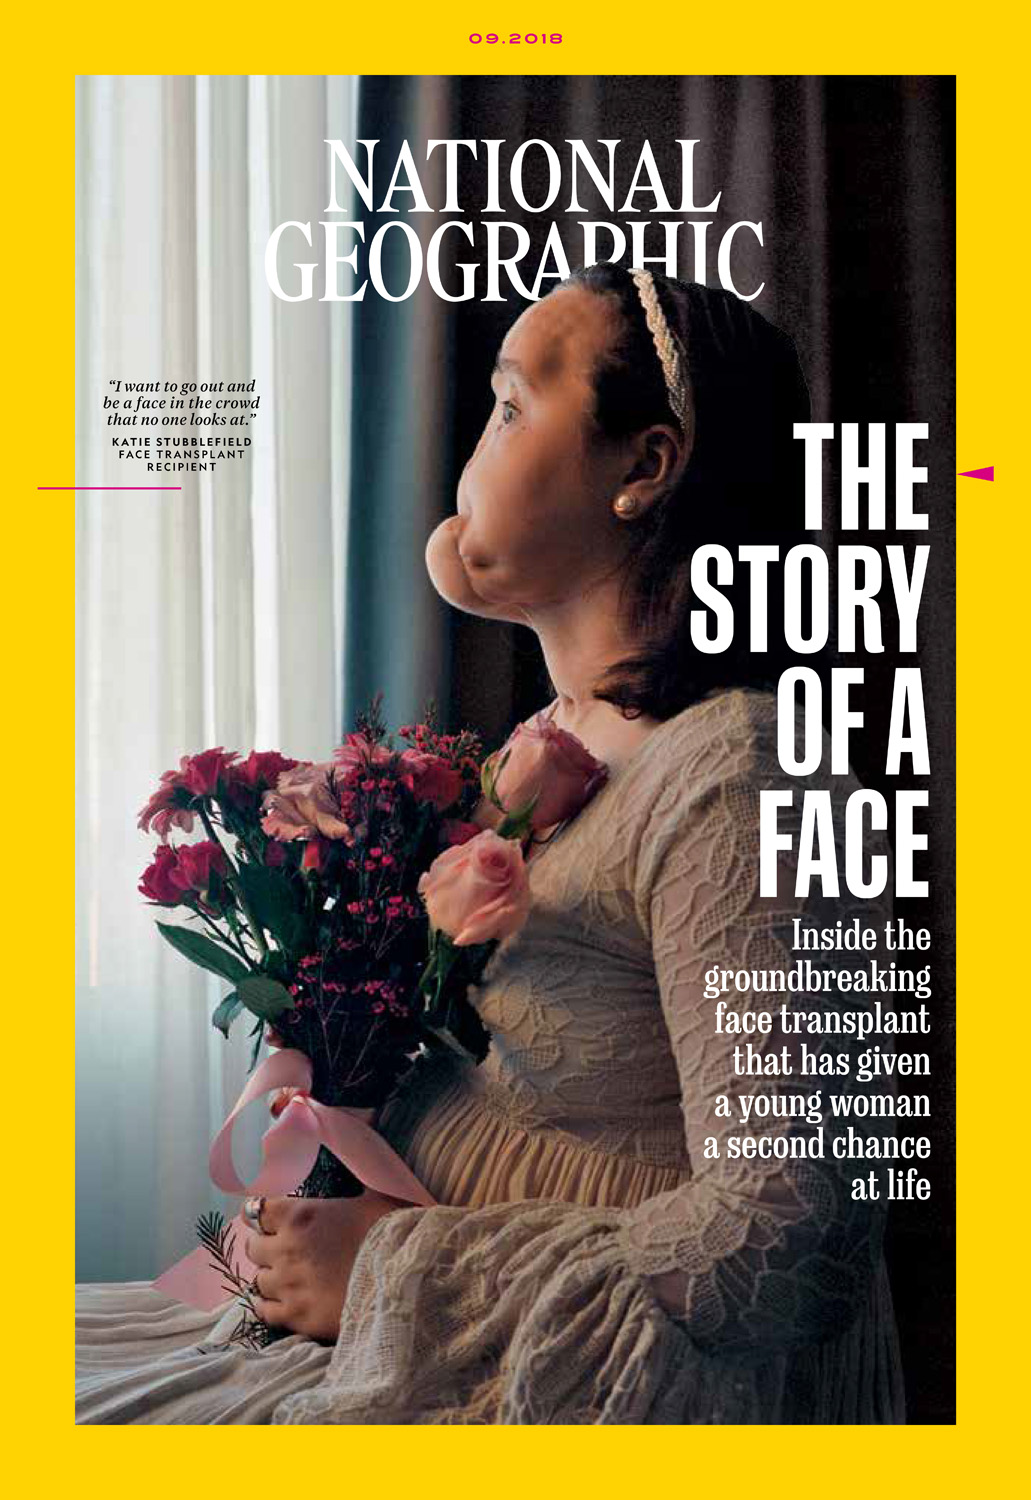 Photo of National Geographic September 2018 Cover